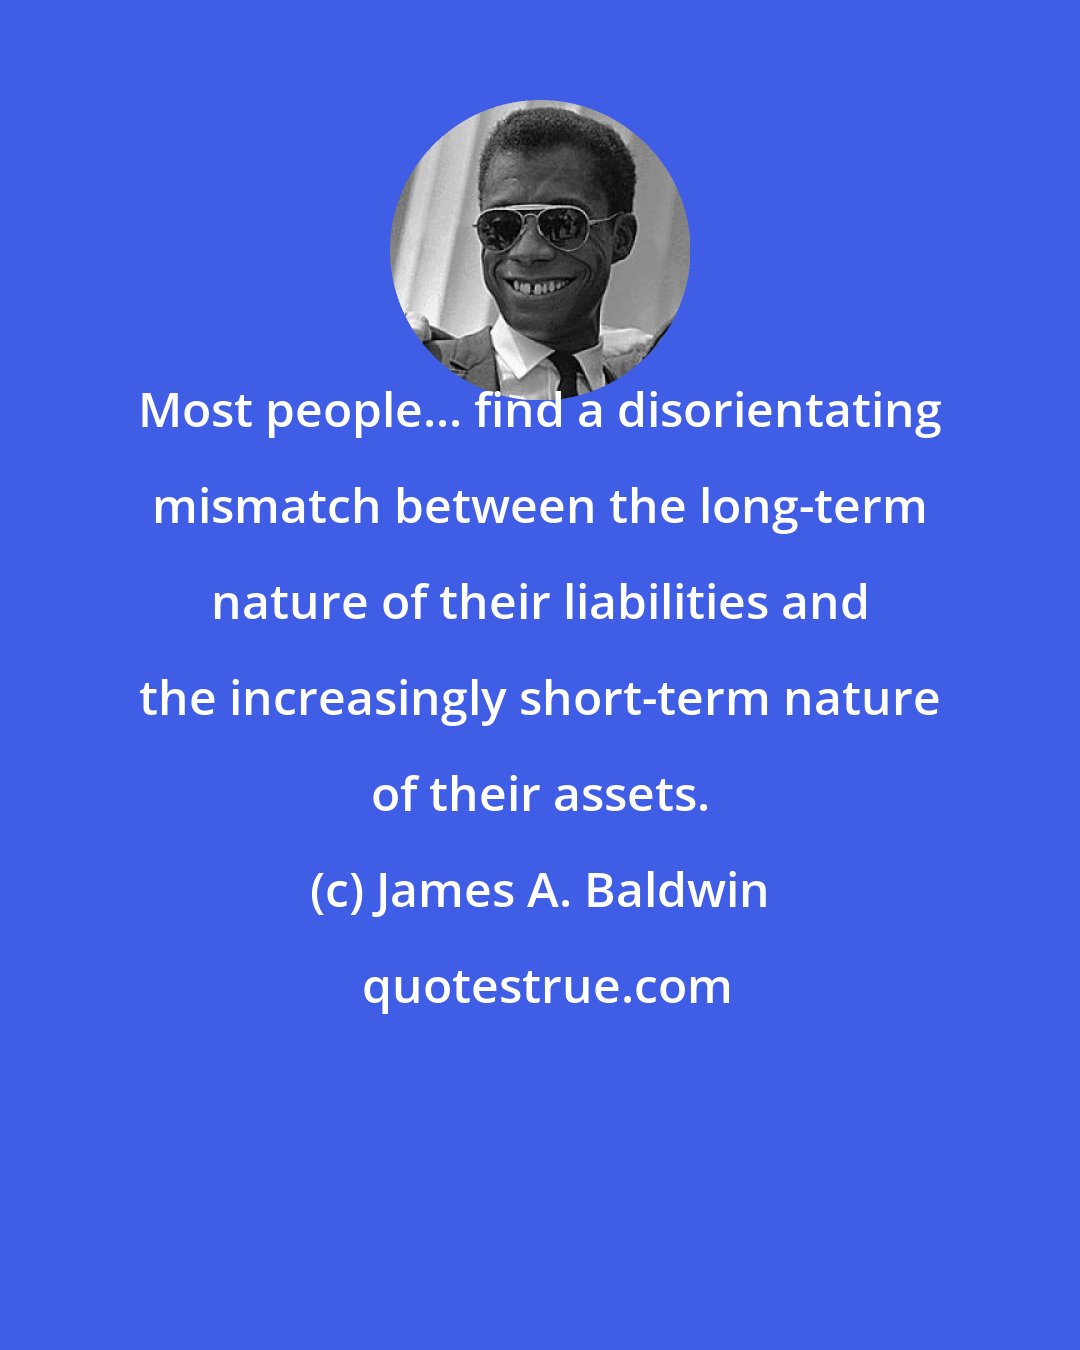 James A. Baldwin: Most people... find a disorientating mismatch between the long-term nature of their liabilities and the increasingly short-term nature of their assets.